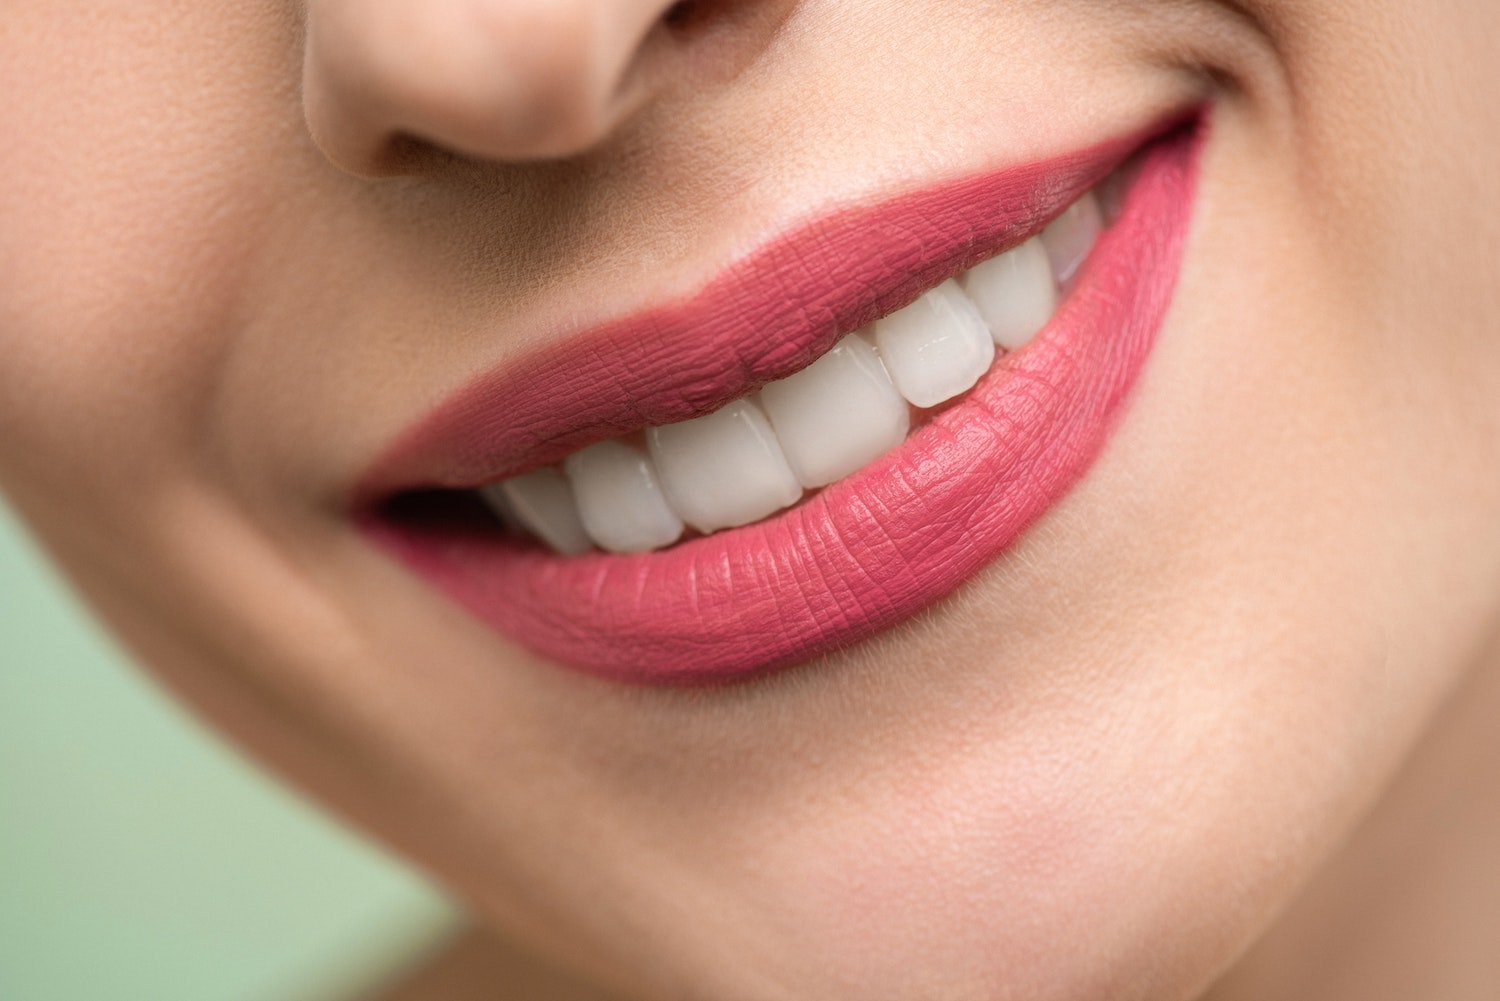 How Do I Know Which Shade My Teeth Are For Teeth Whitening?